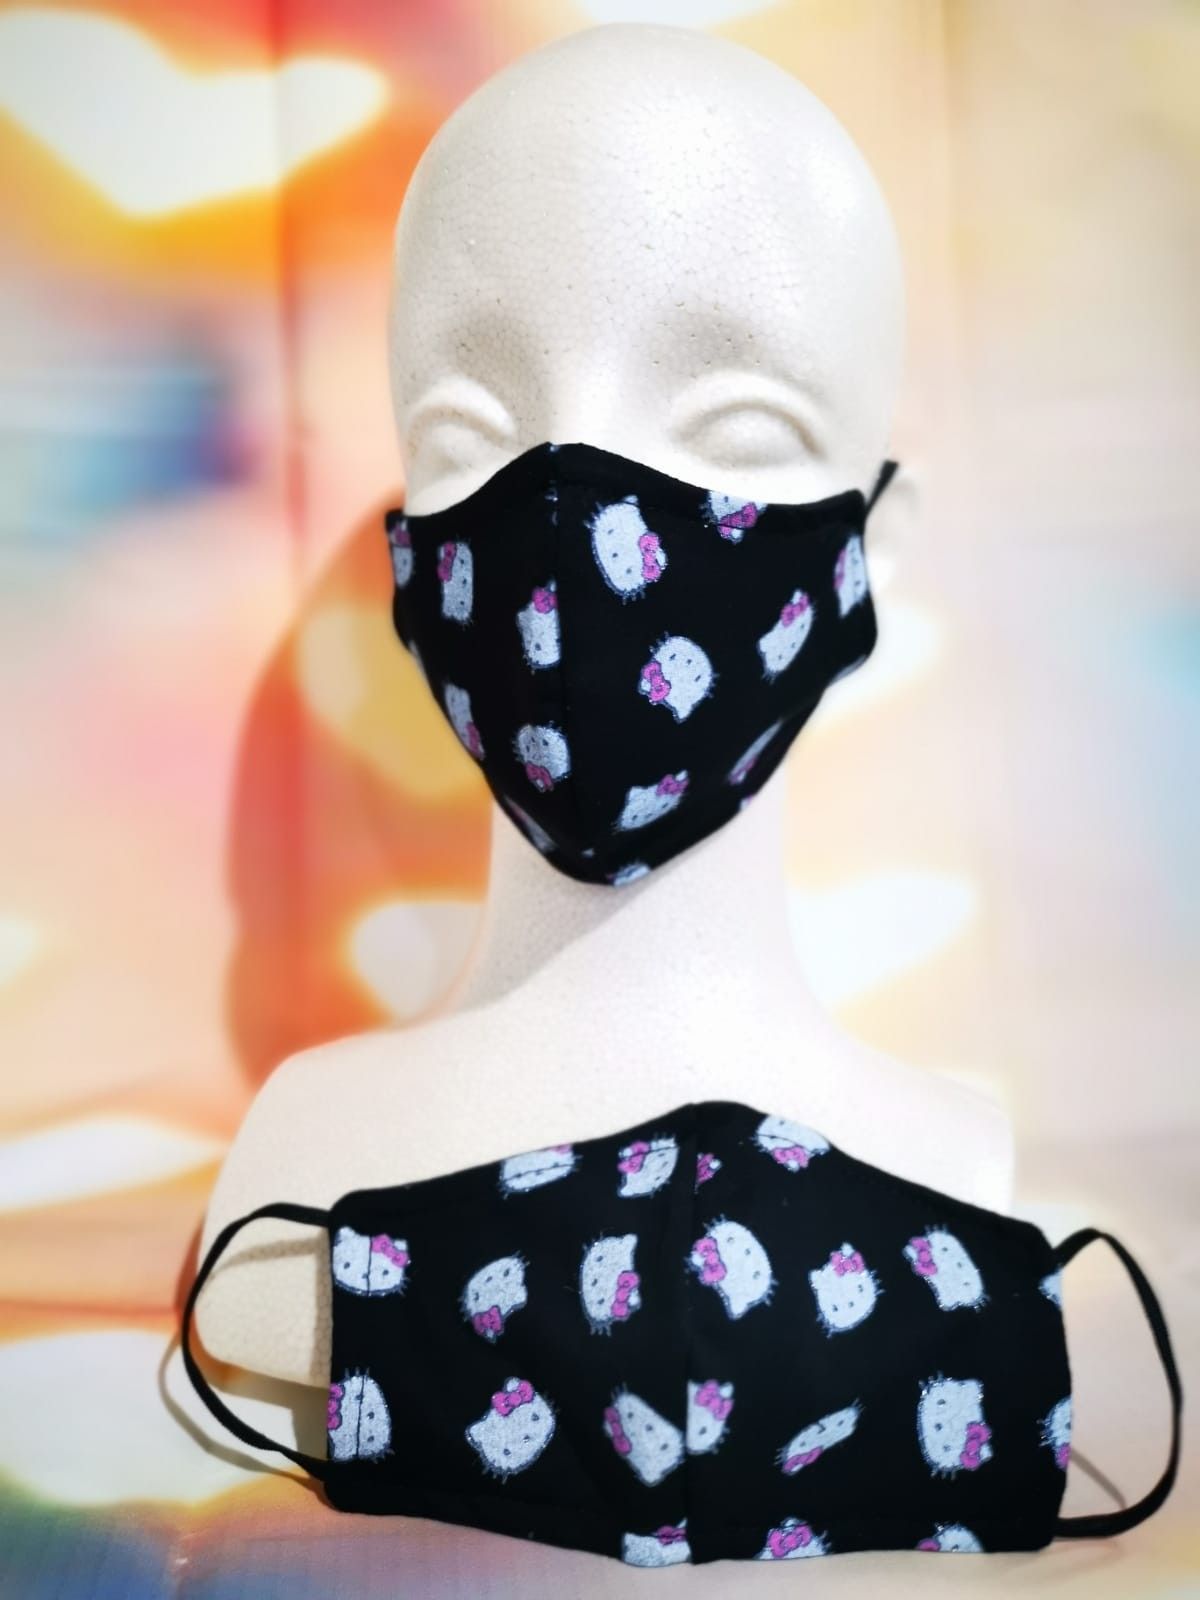 Kids Face mask, Facemask (hello kitty Black): Hand made mask, reversible, reusable, washer and dryer safe.